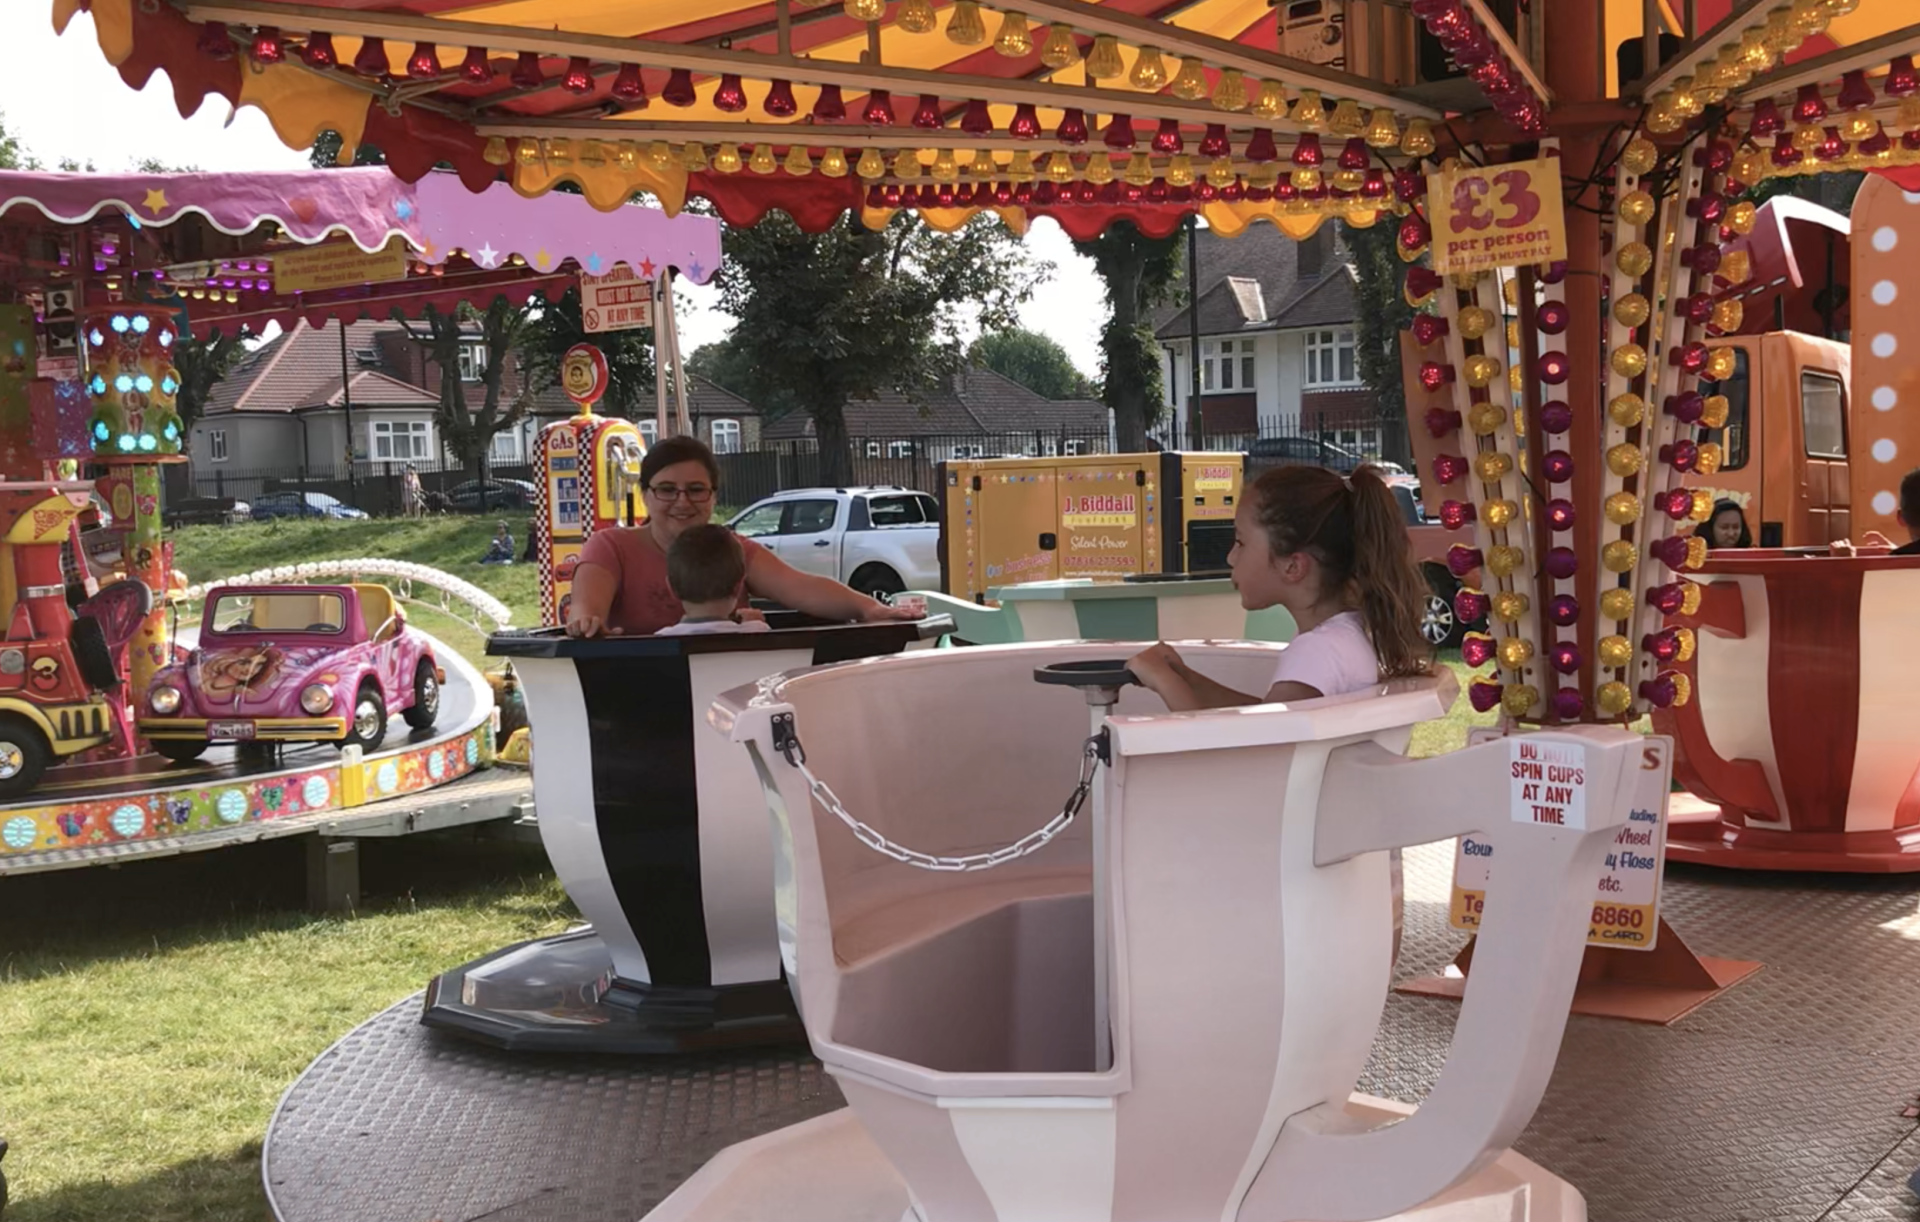 A woman and two children are riding a tea cup ride at a carnival.